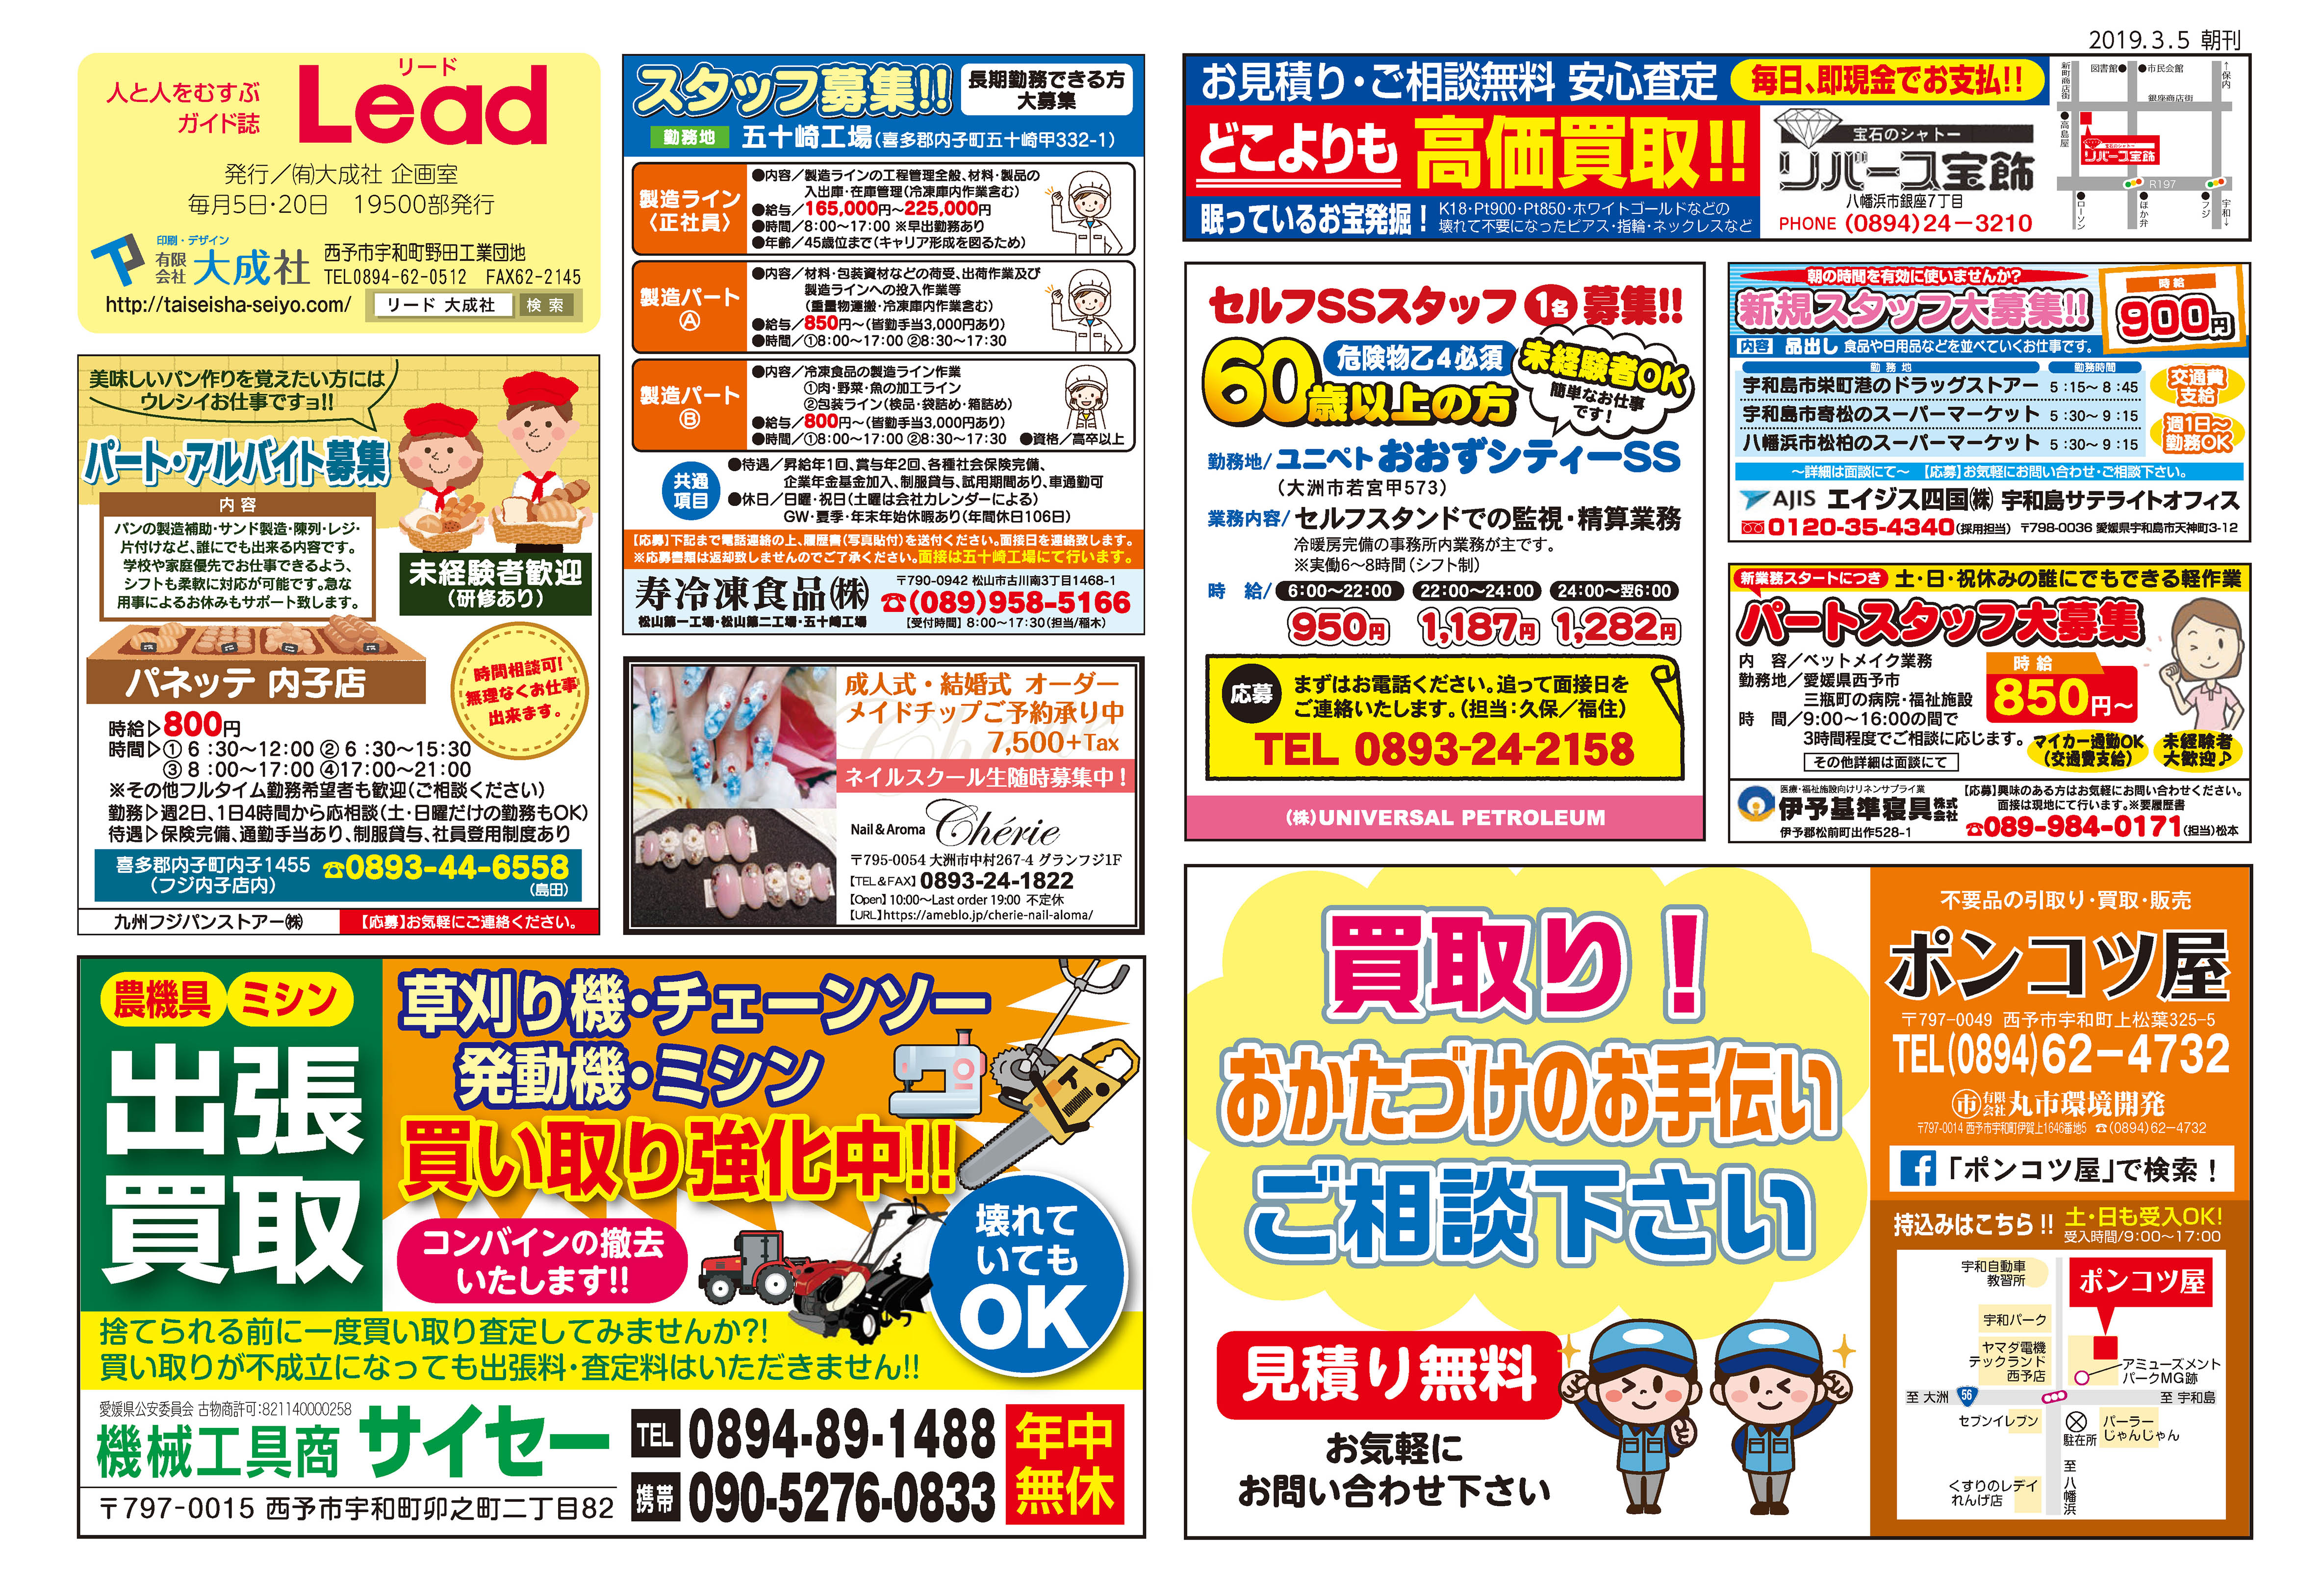 Lead190305-omote